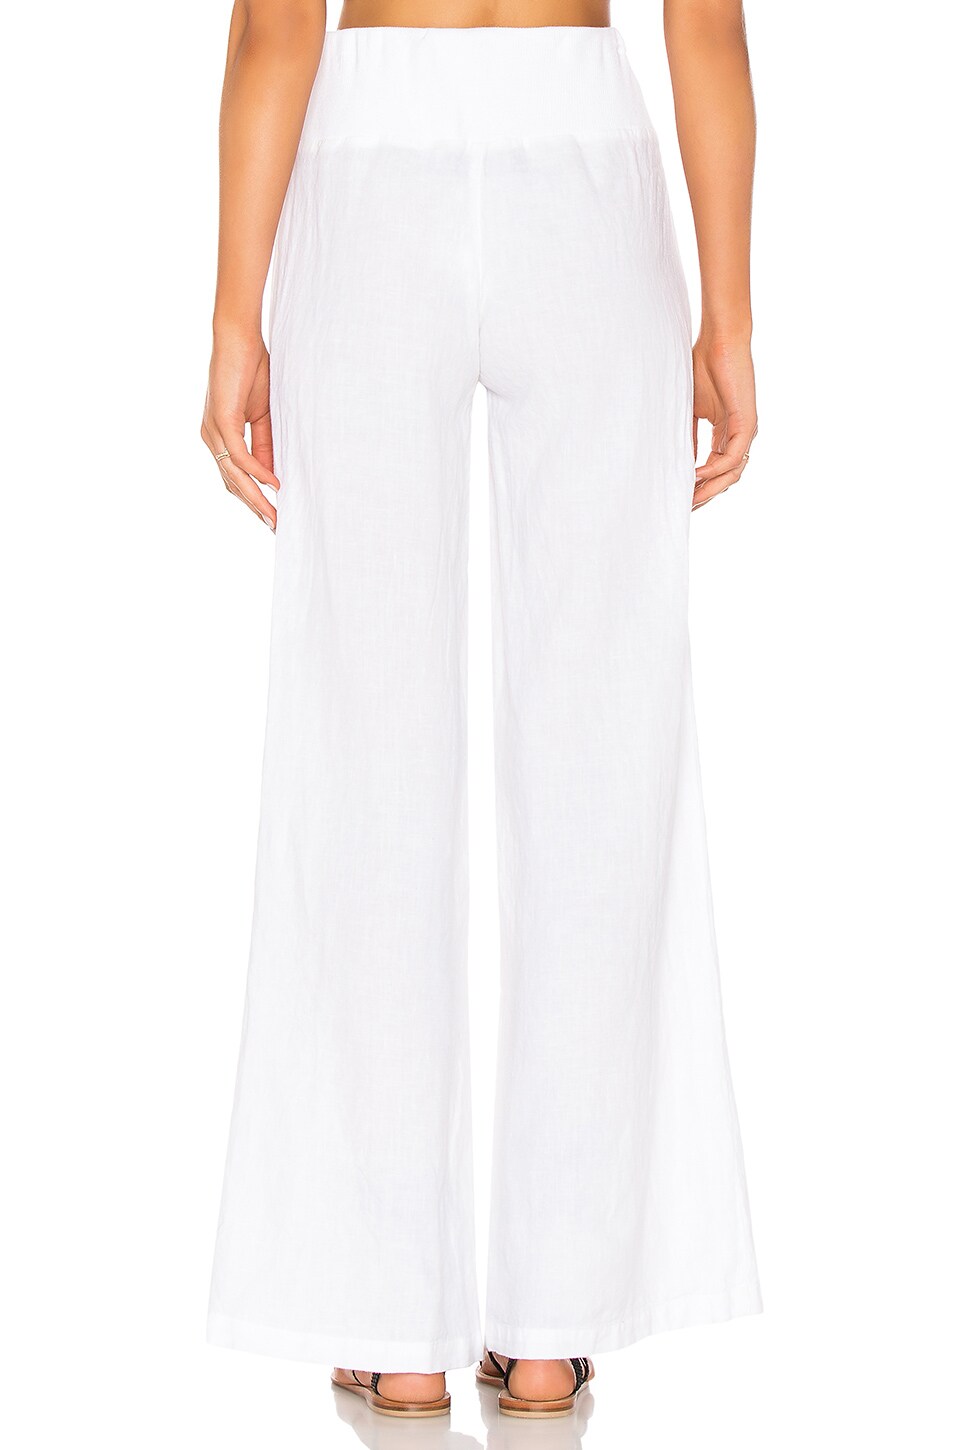 Enza Costa French Linen Pintuck Wide Leg Pant in White | REVOLVE